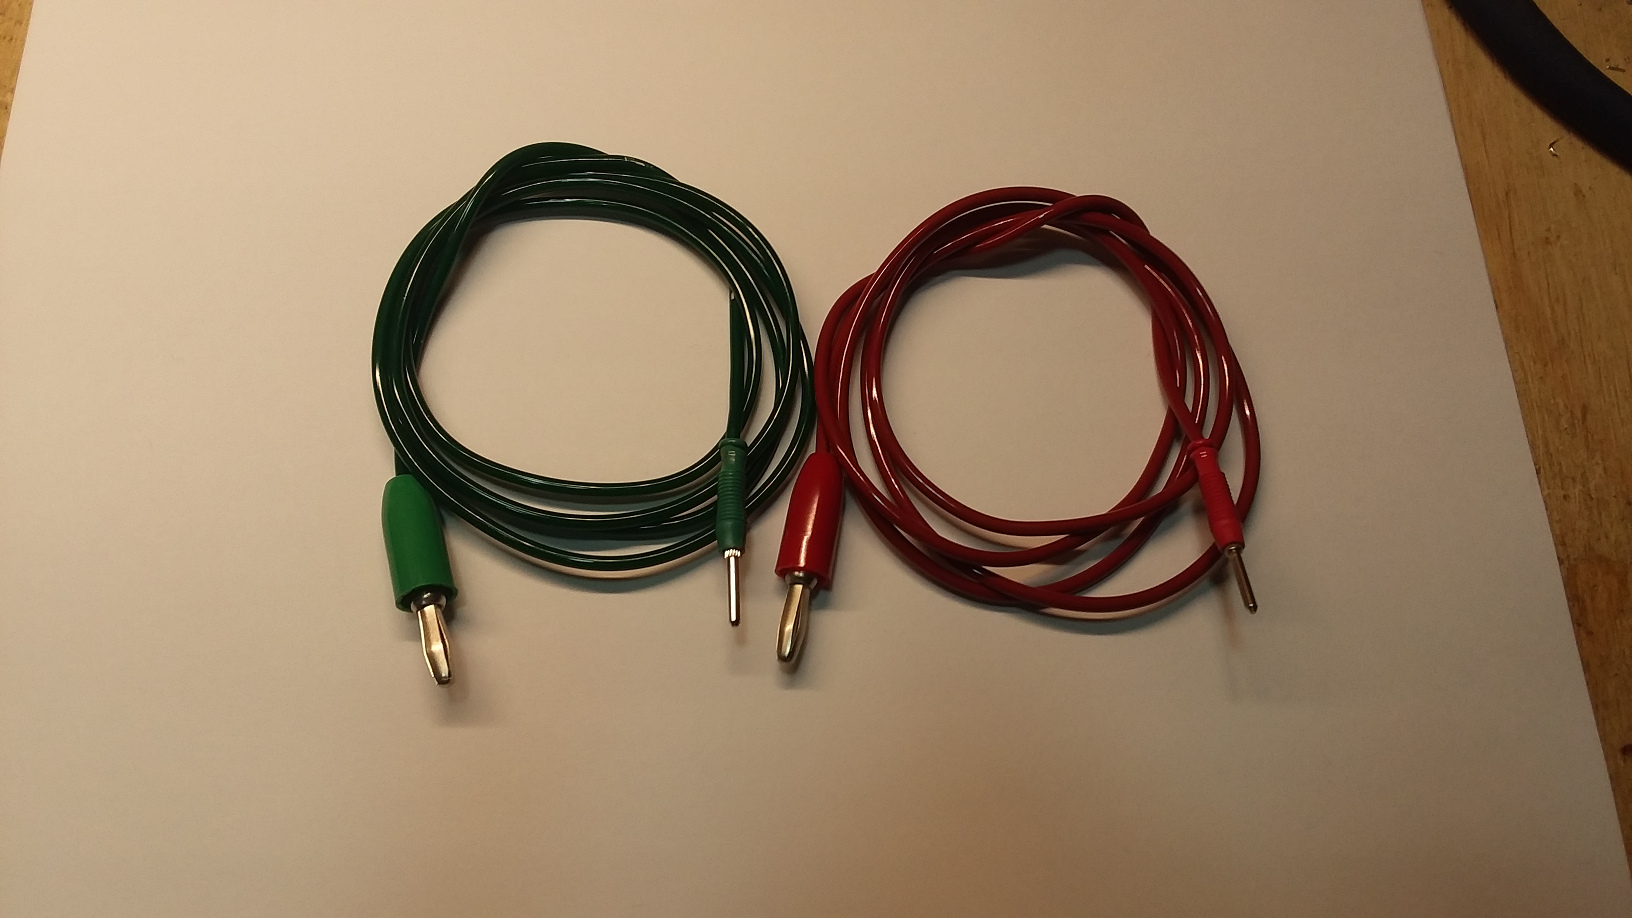 2mm pin type wires, 39 inches long